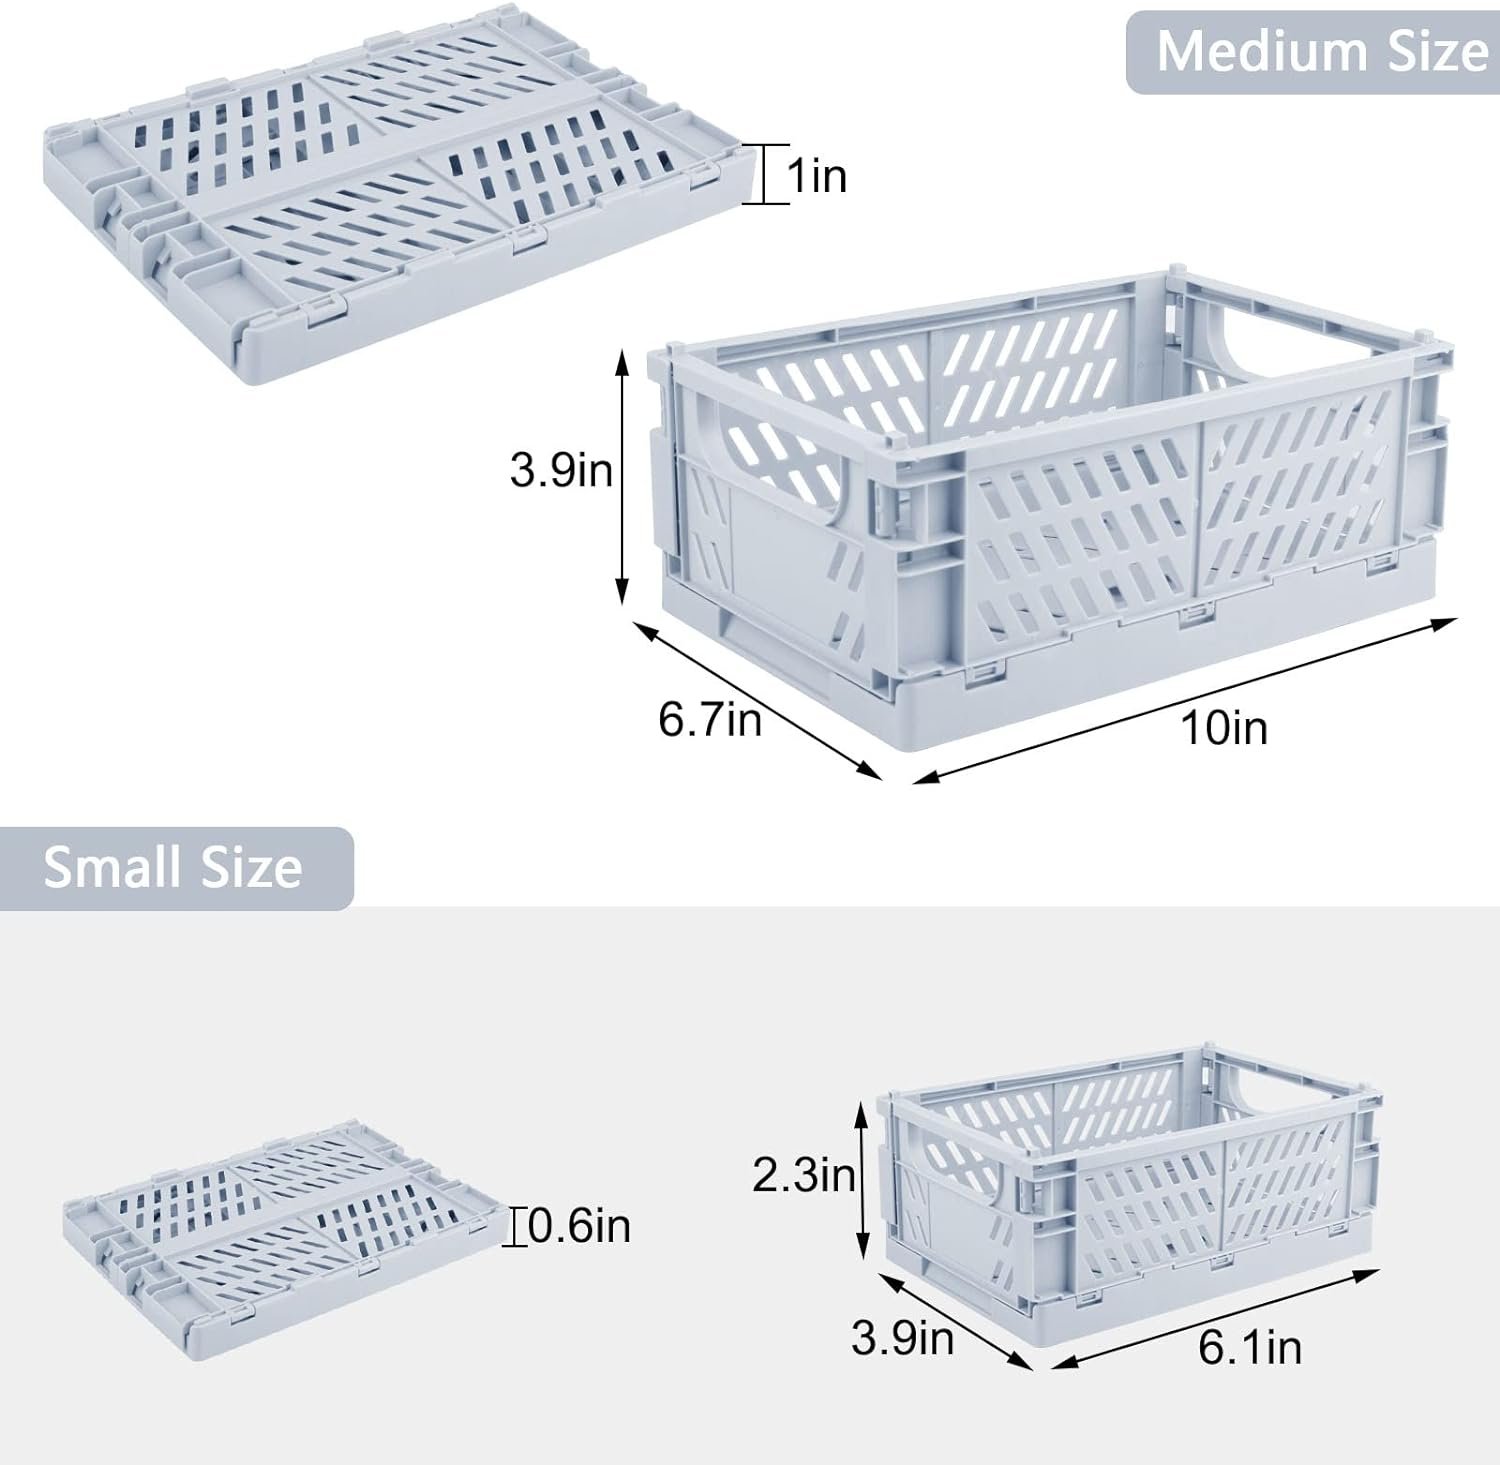 Weraher Plastic Baskets Review